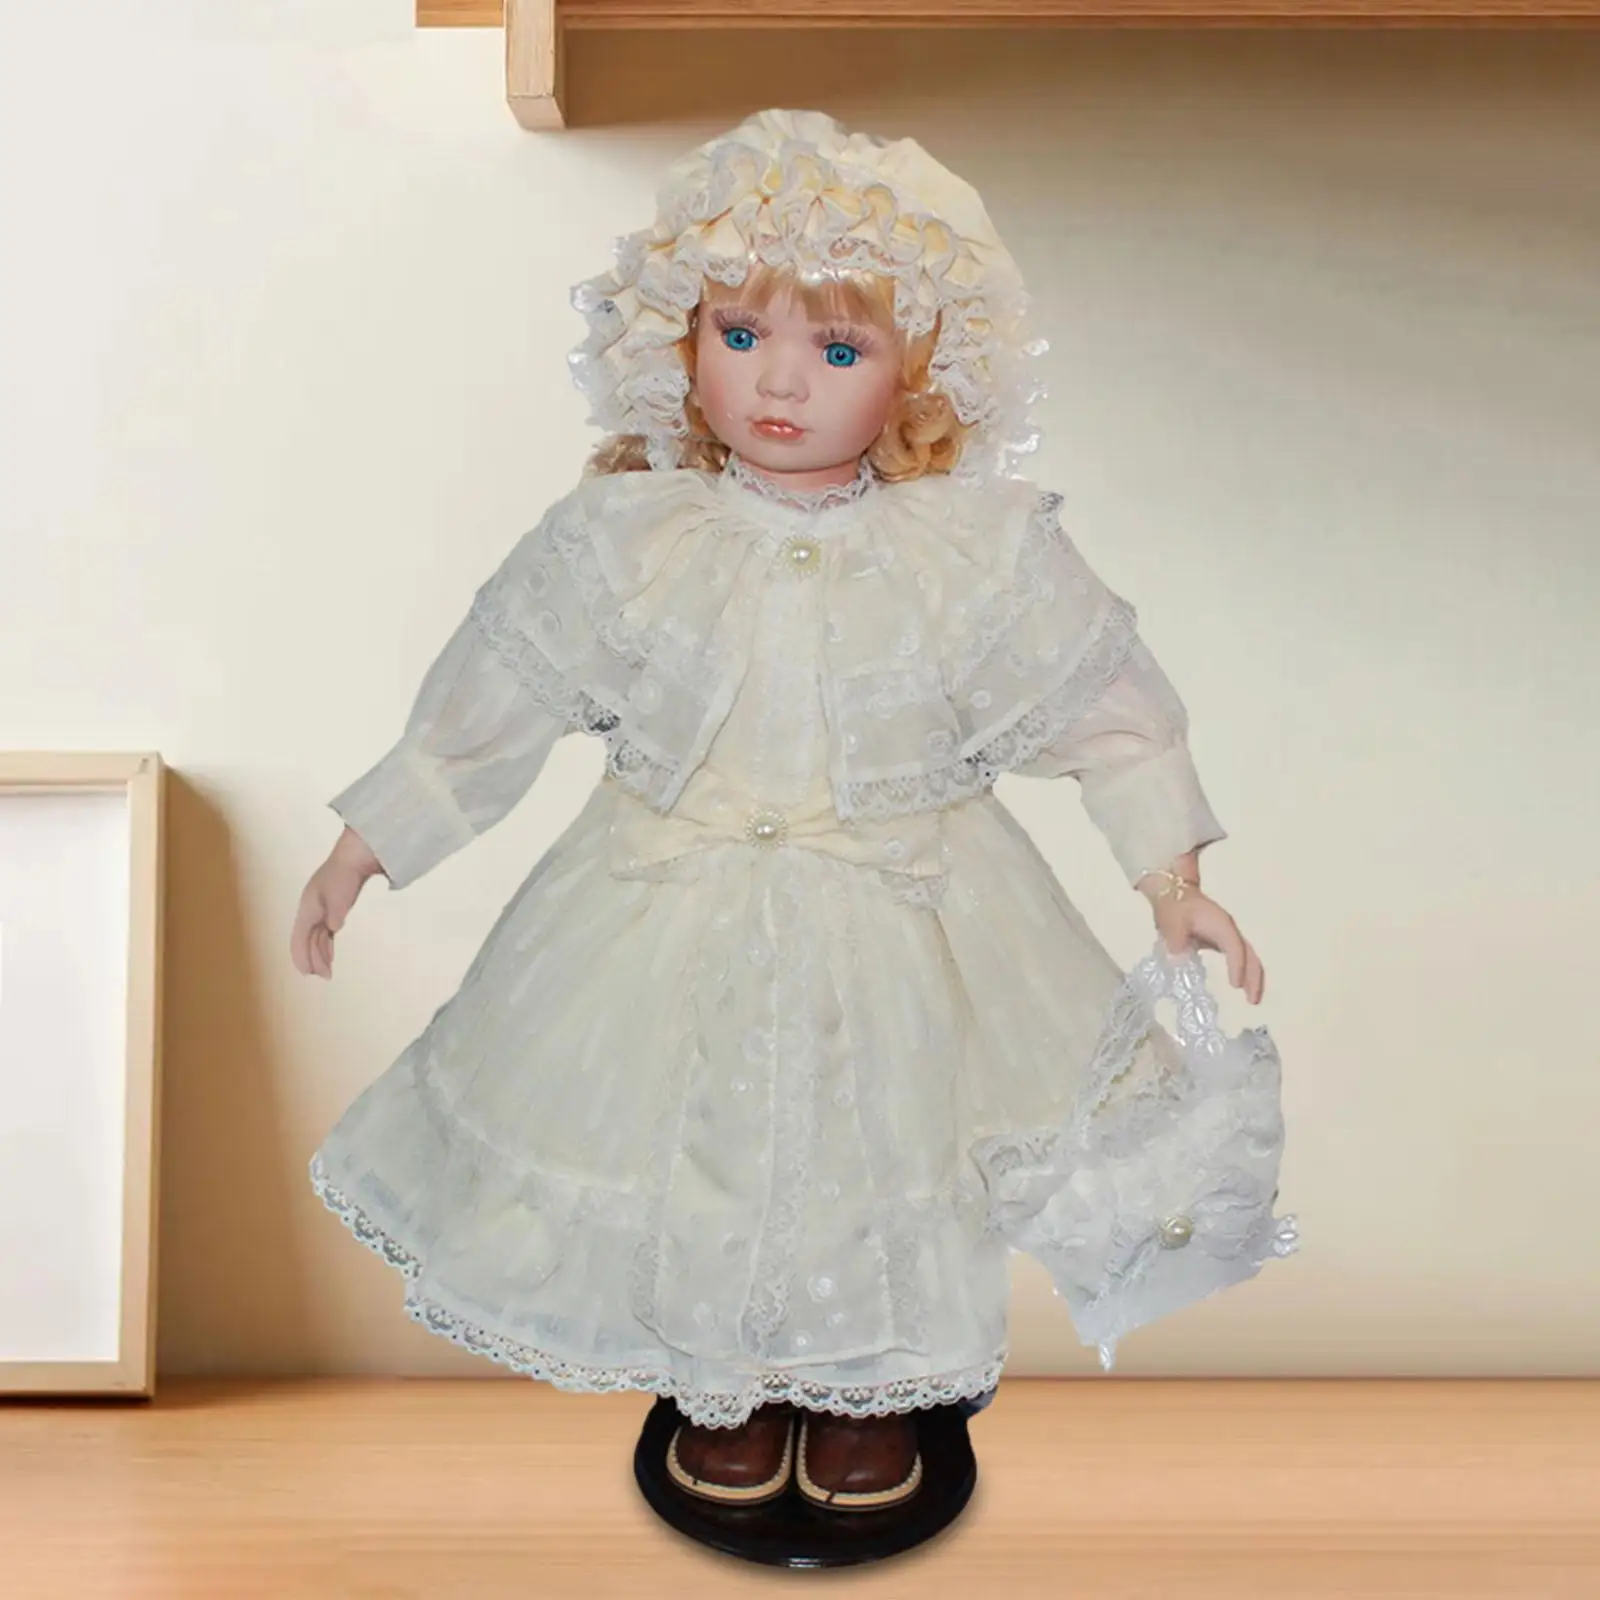 60cm Ceramic Doll Model Long Hair Girl Doll for Birthday Present Collections